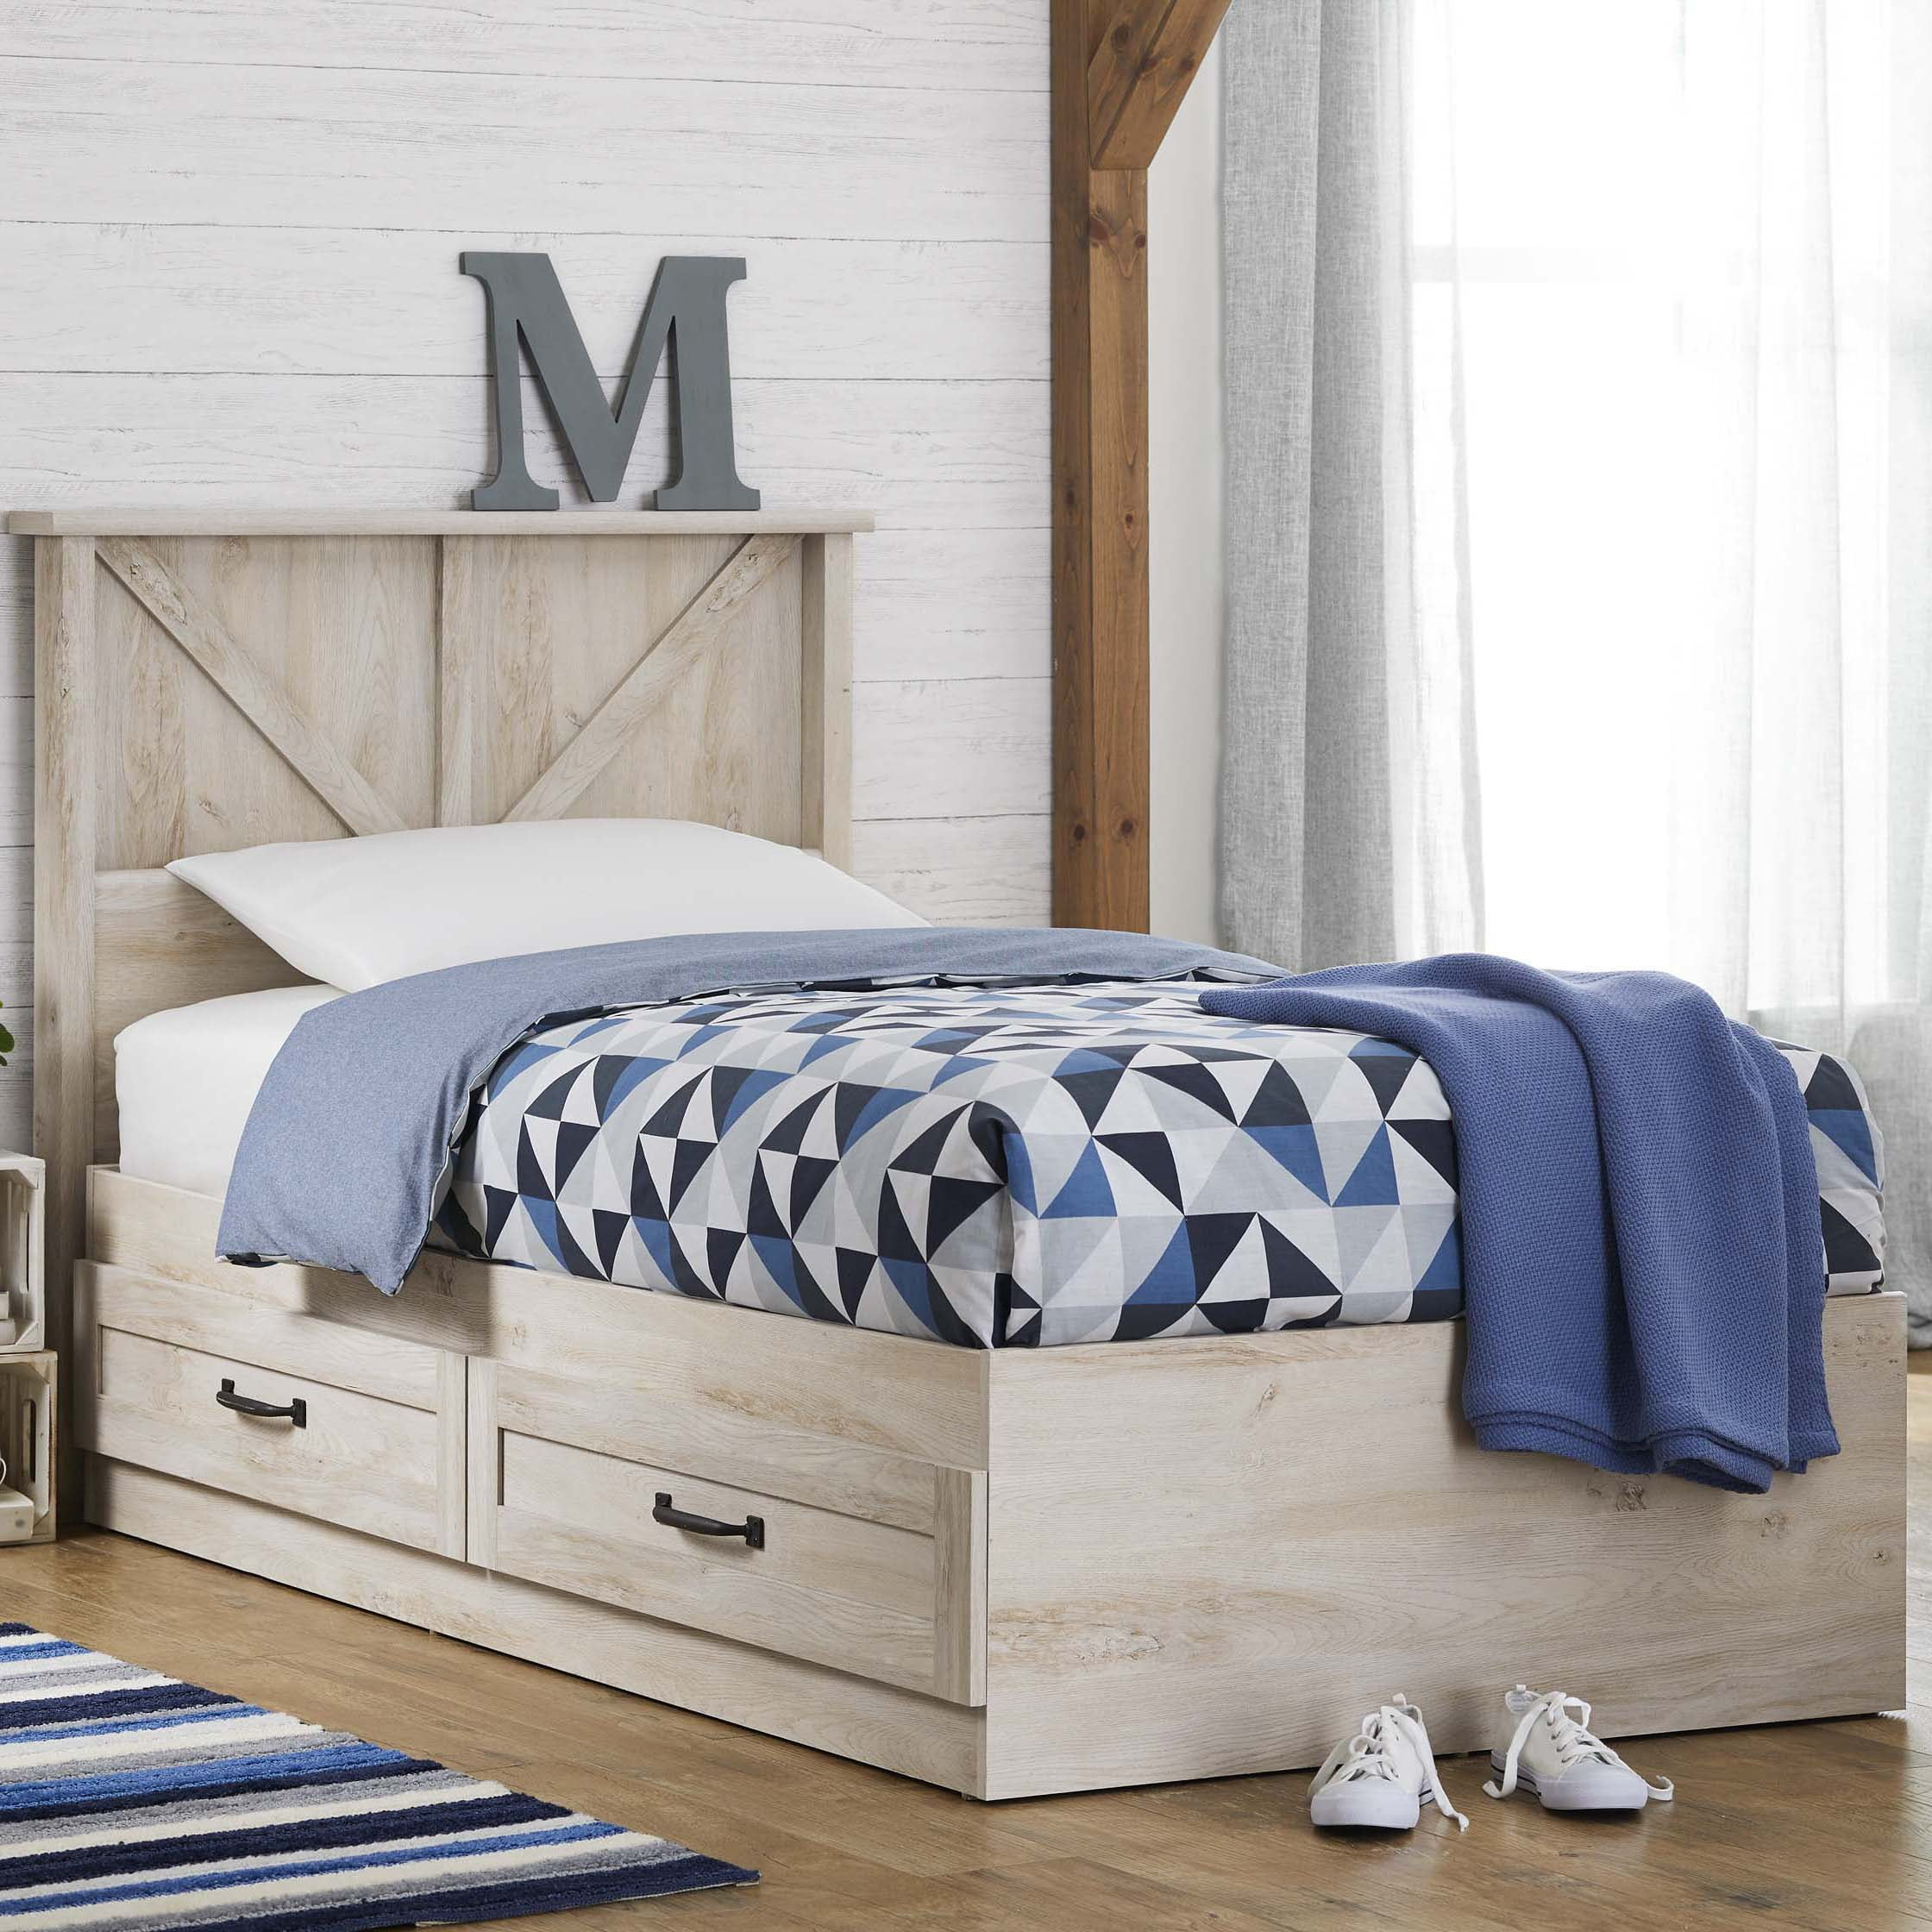 NEW WHITE FINISH WOOD COUNTRY CASUAL STYLE TWIN or FULL BED 